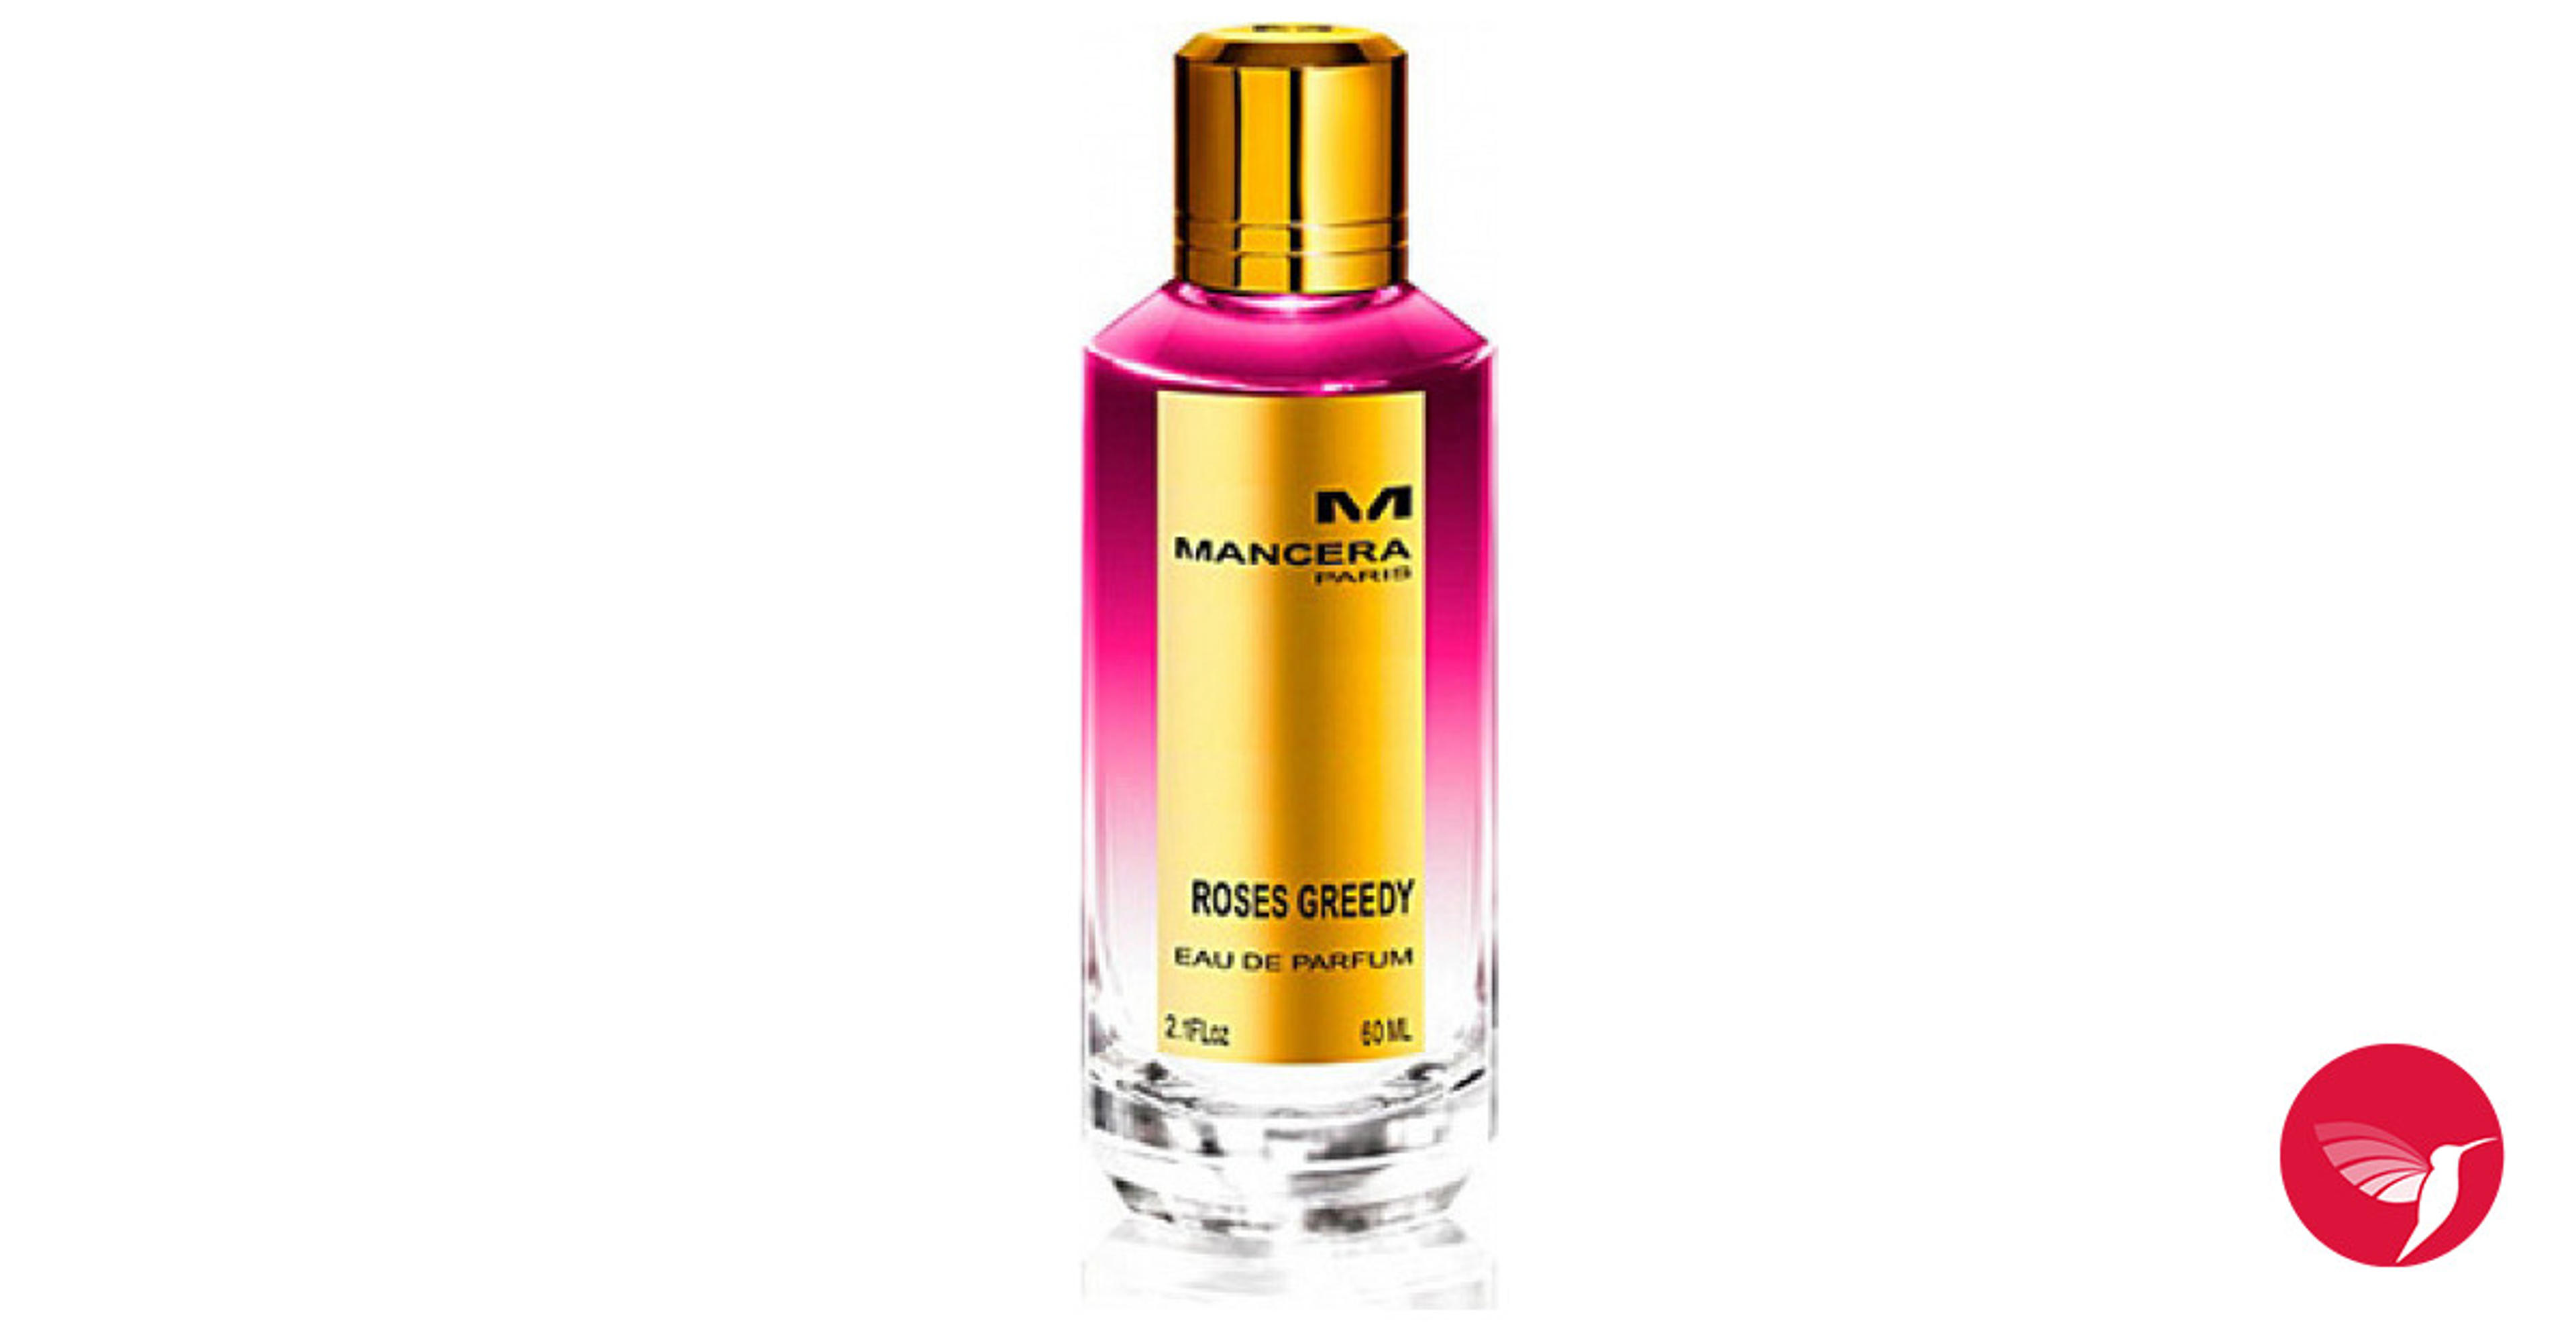 Roses Greedy Mancera perfume - a fragrance for women and men 2012